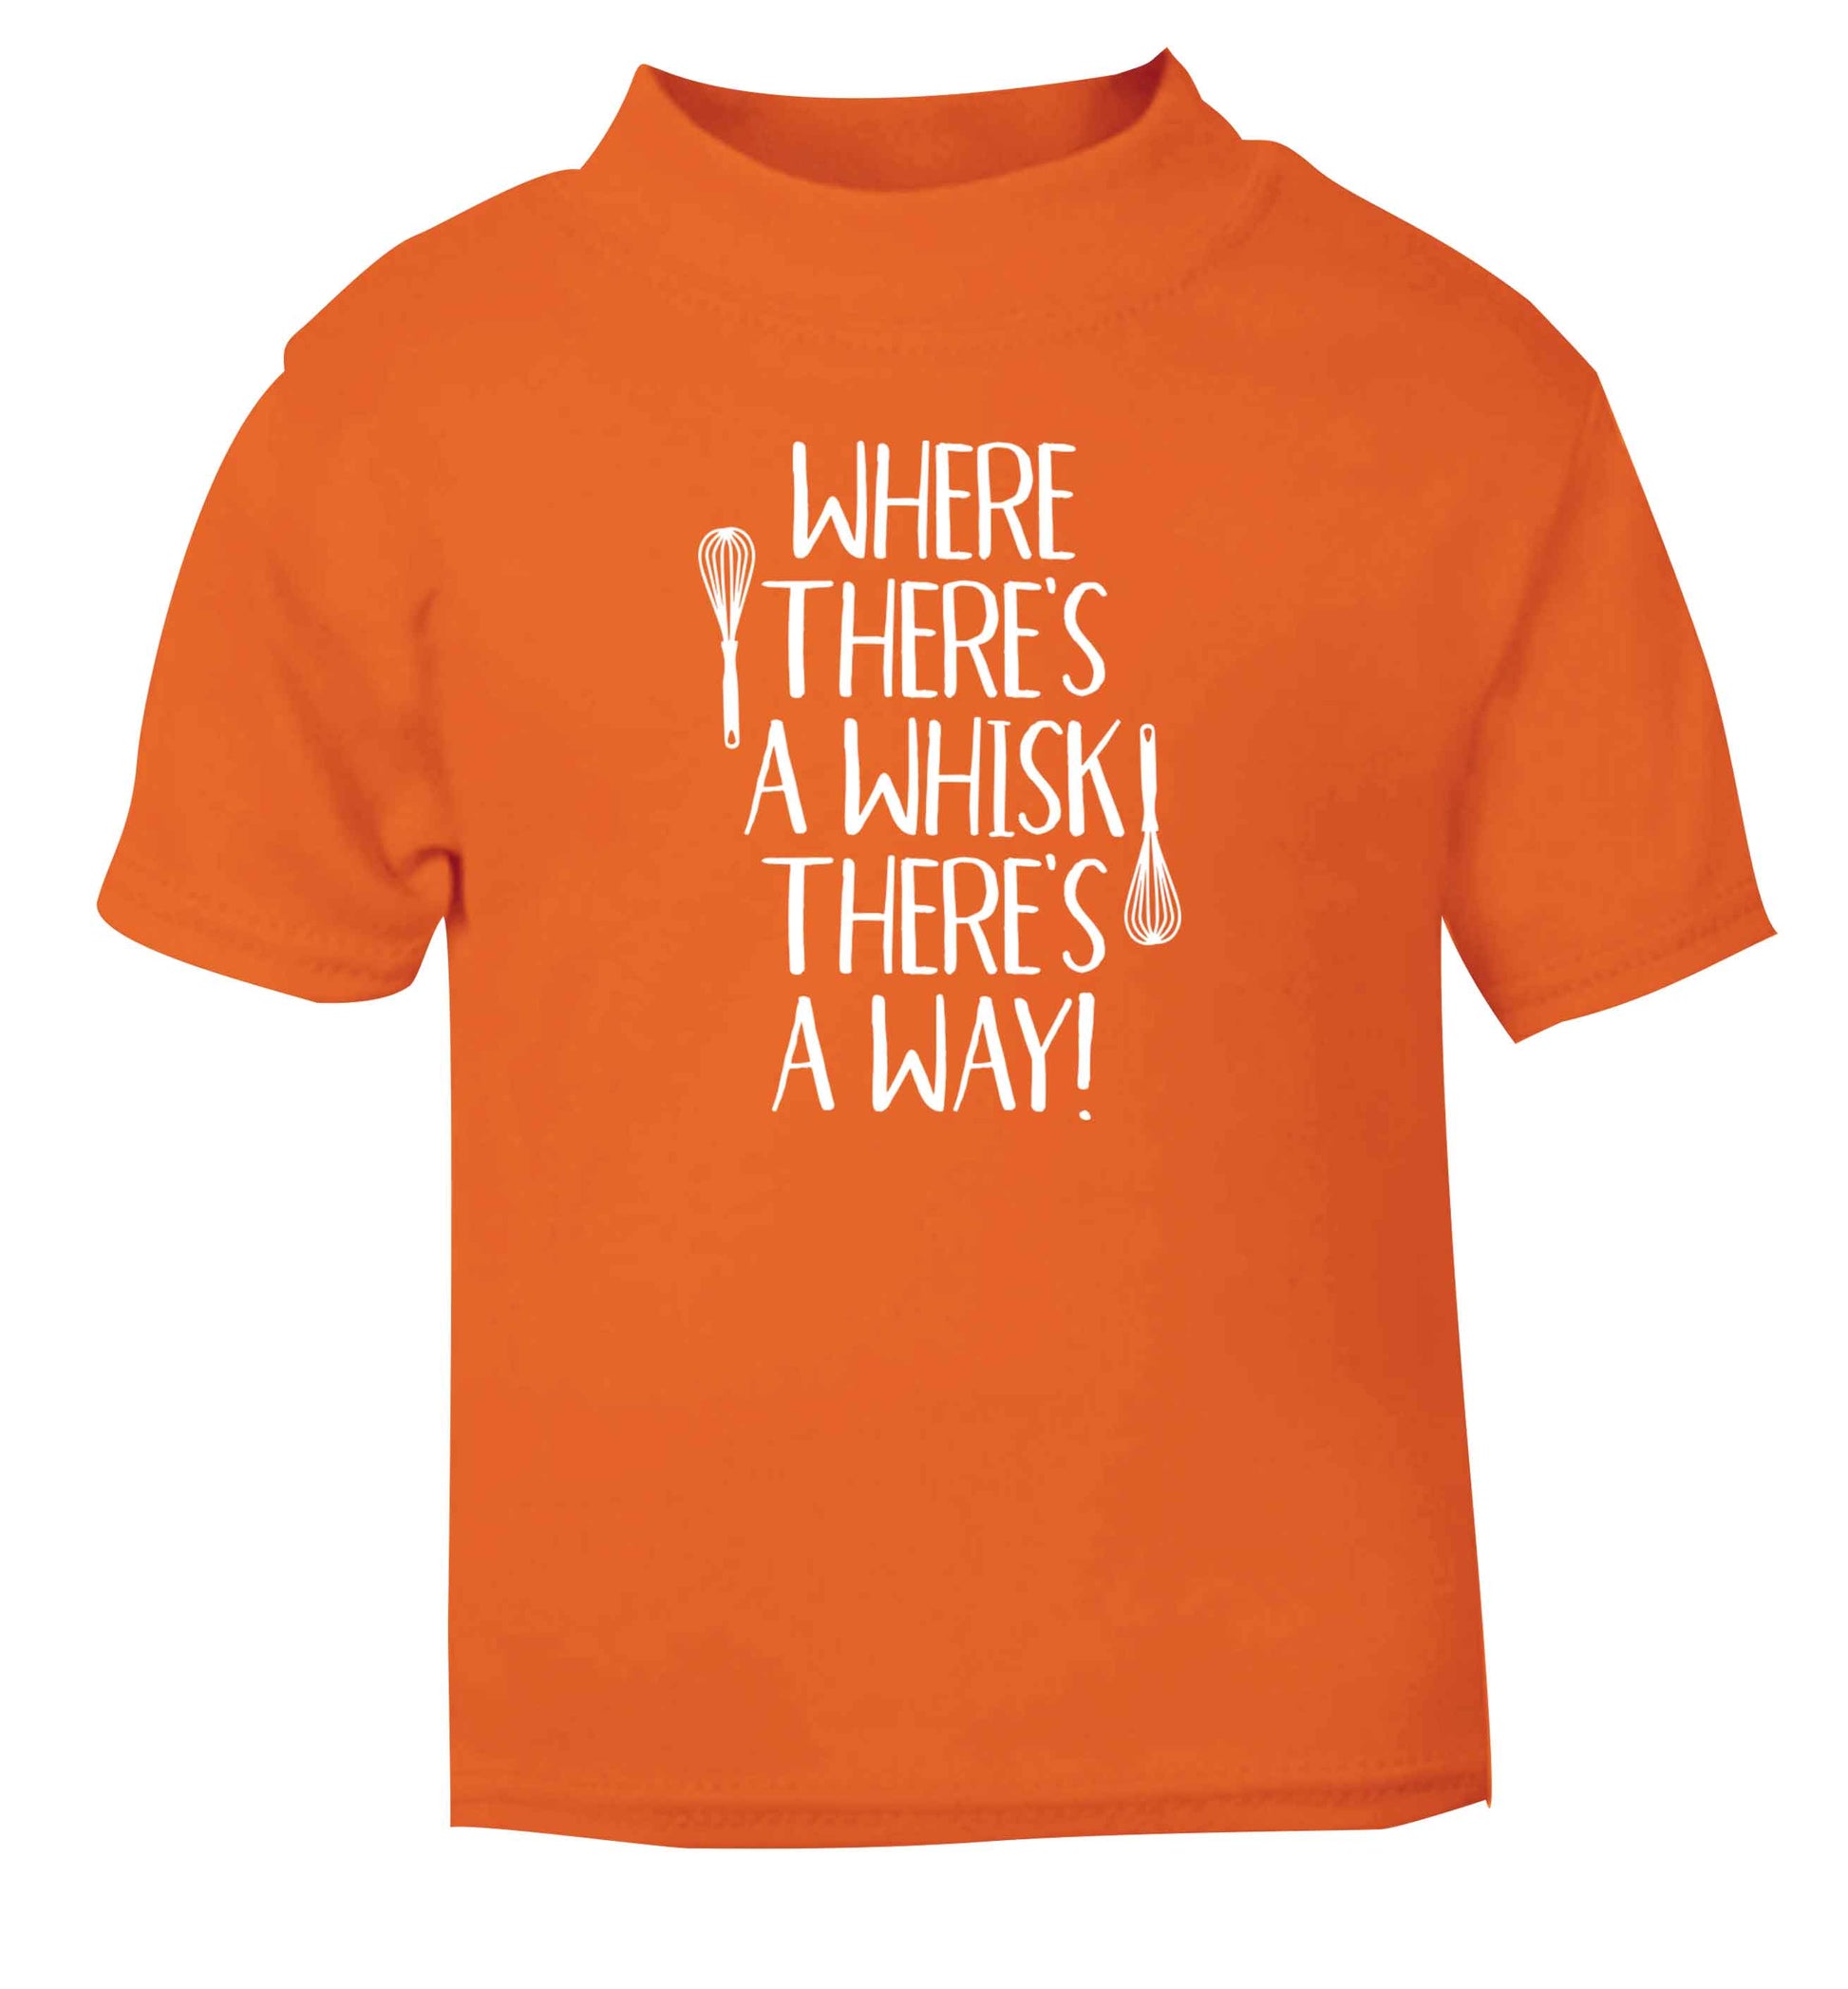 Where there's a whisk there's a way orange Baby Toddler Tshirt 2 Years